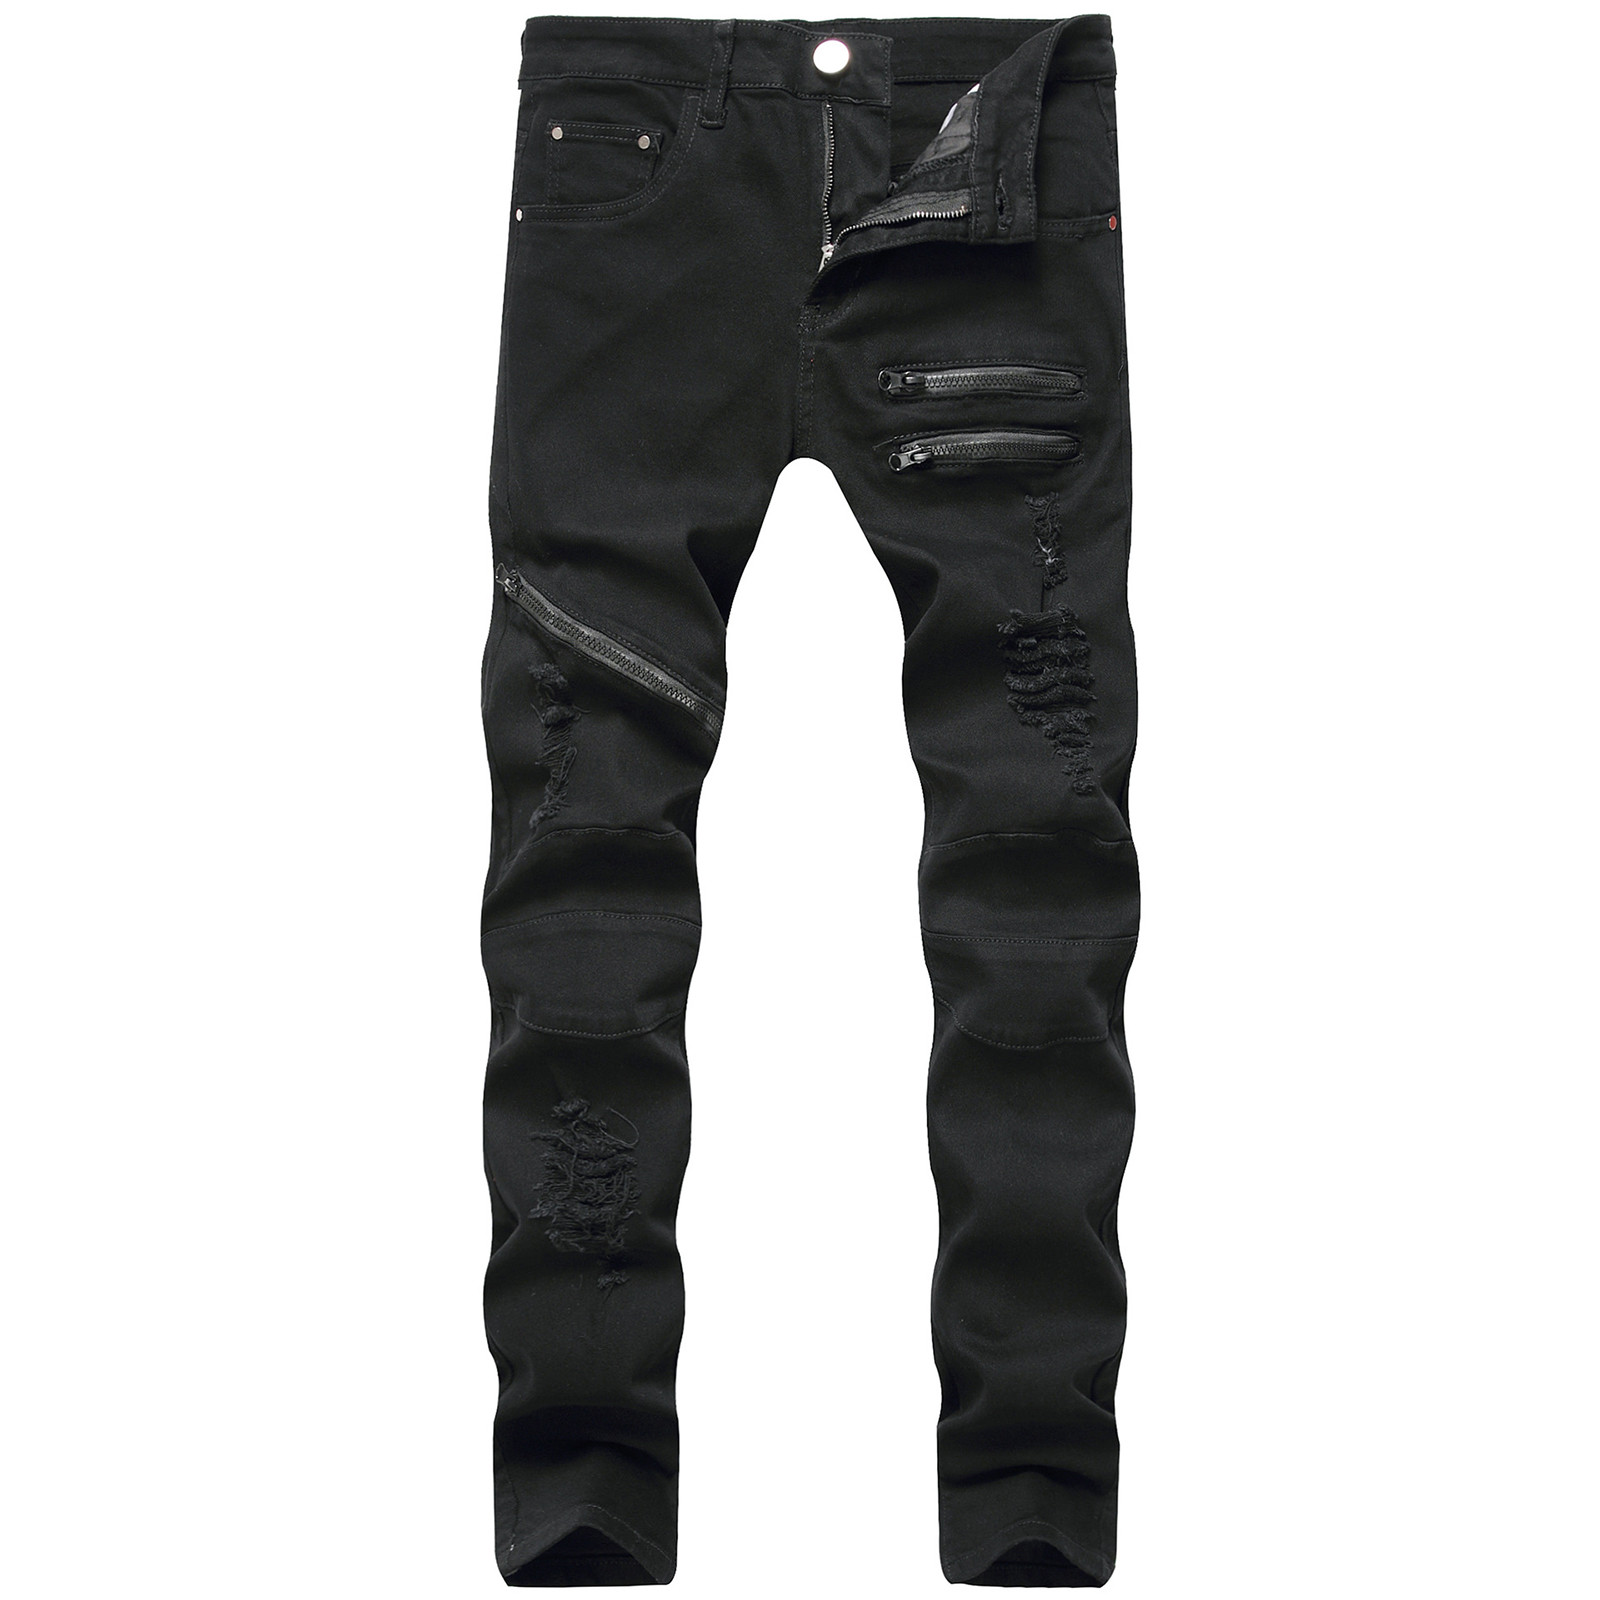 Pants for Men's Jeans Newly Slim Ripped Hip-hop Stretch Denim Cargo Pants Motorcycle Capri Trouse Pencil Pants - image 3 of 4